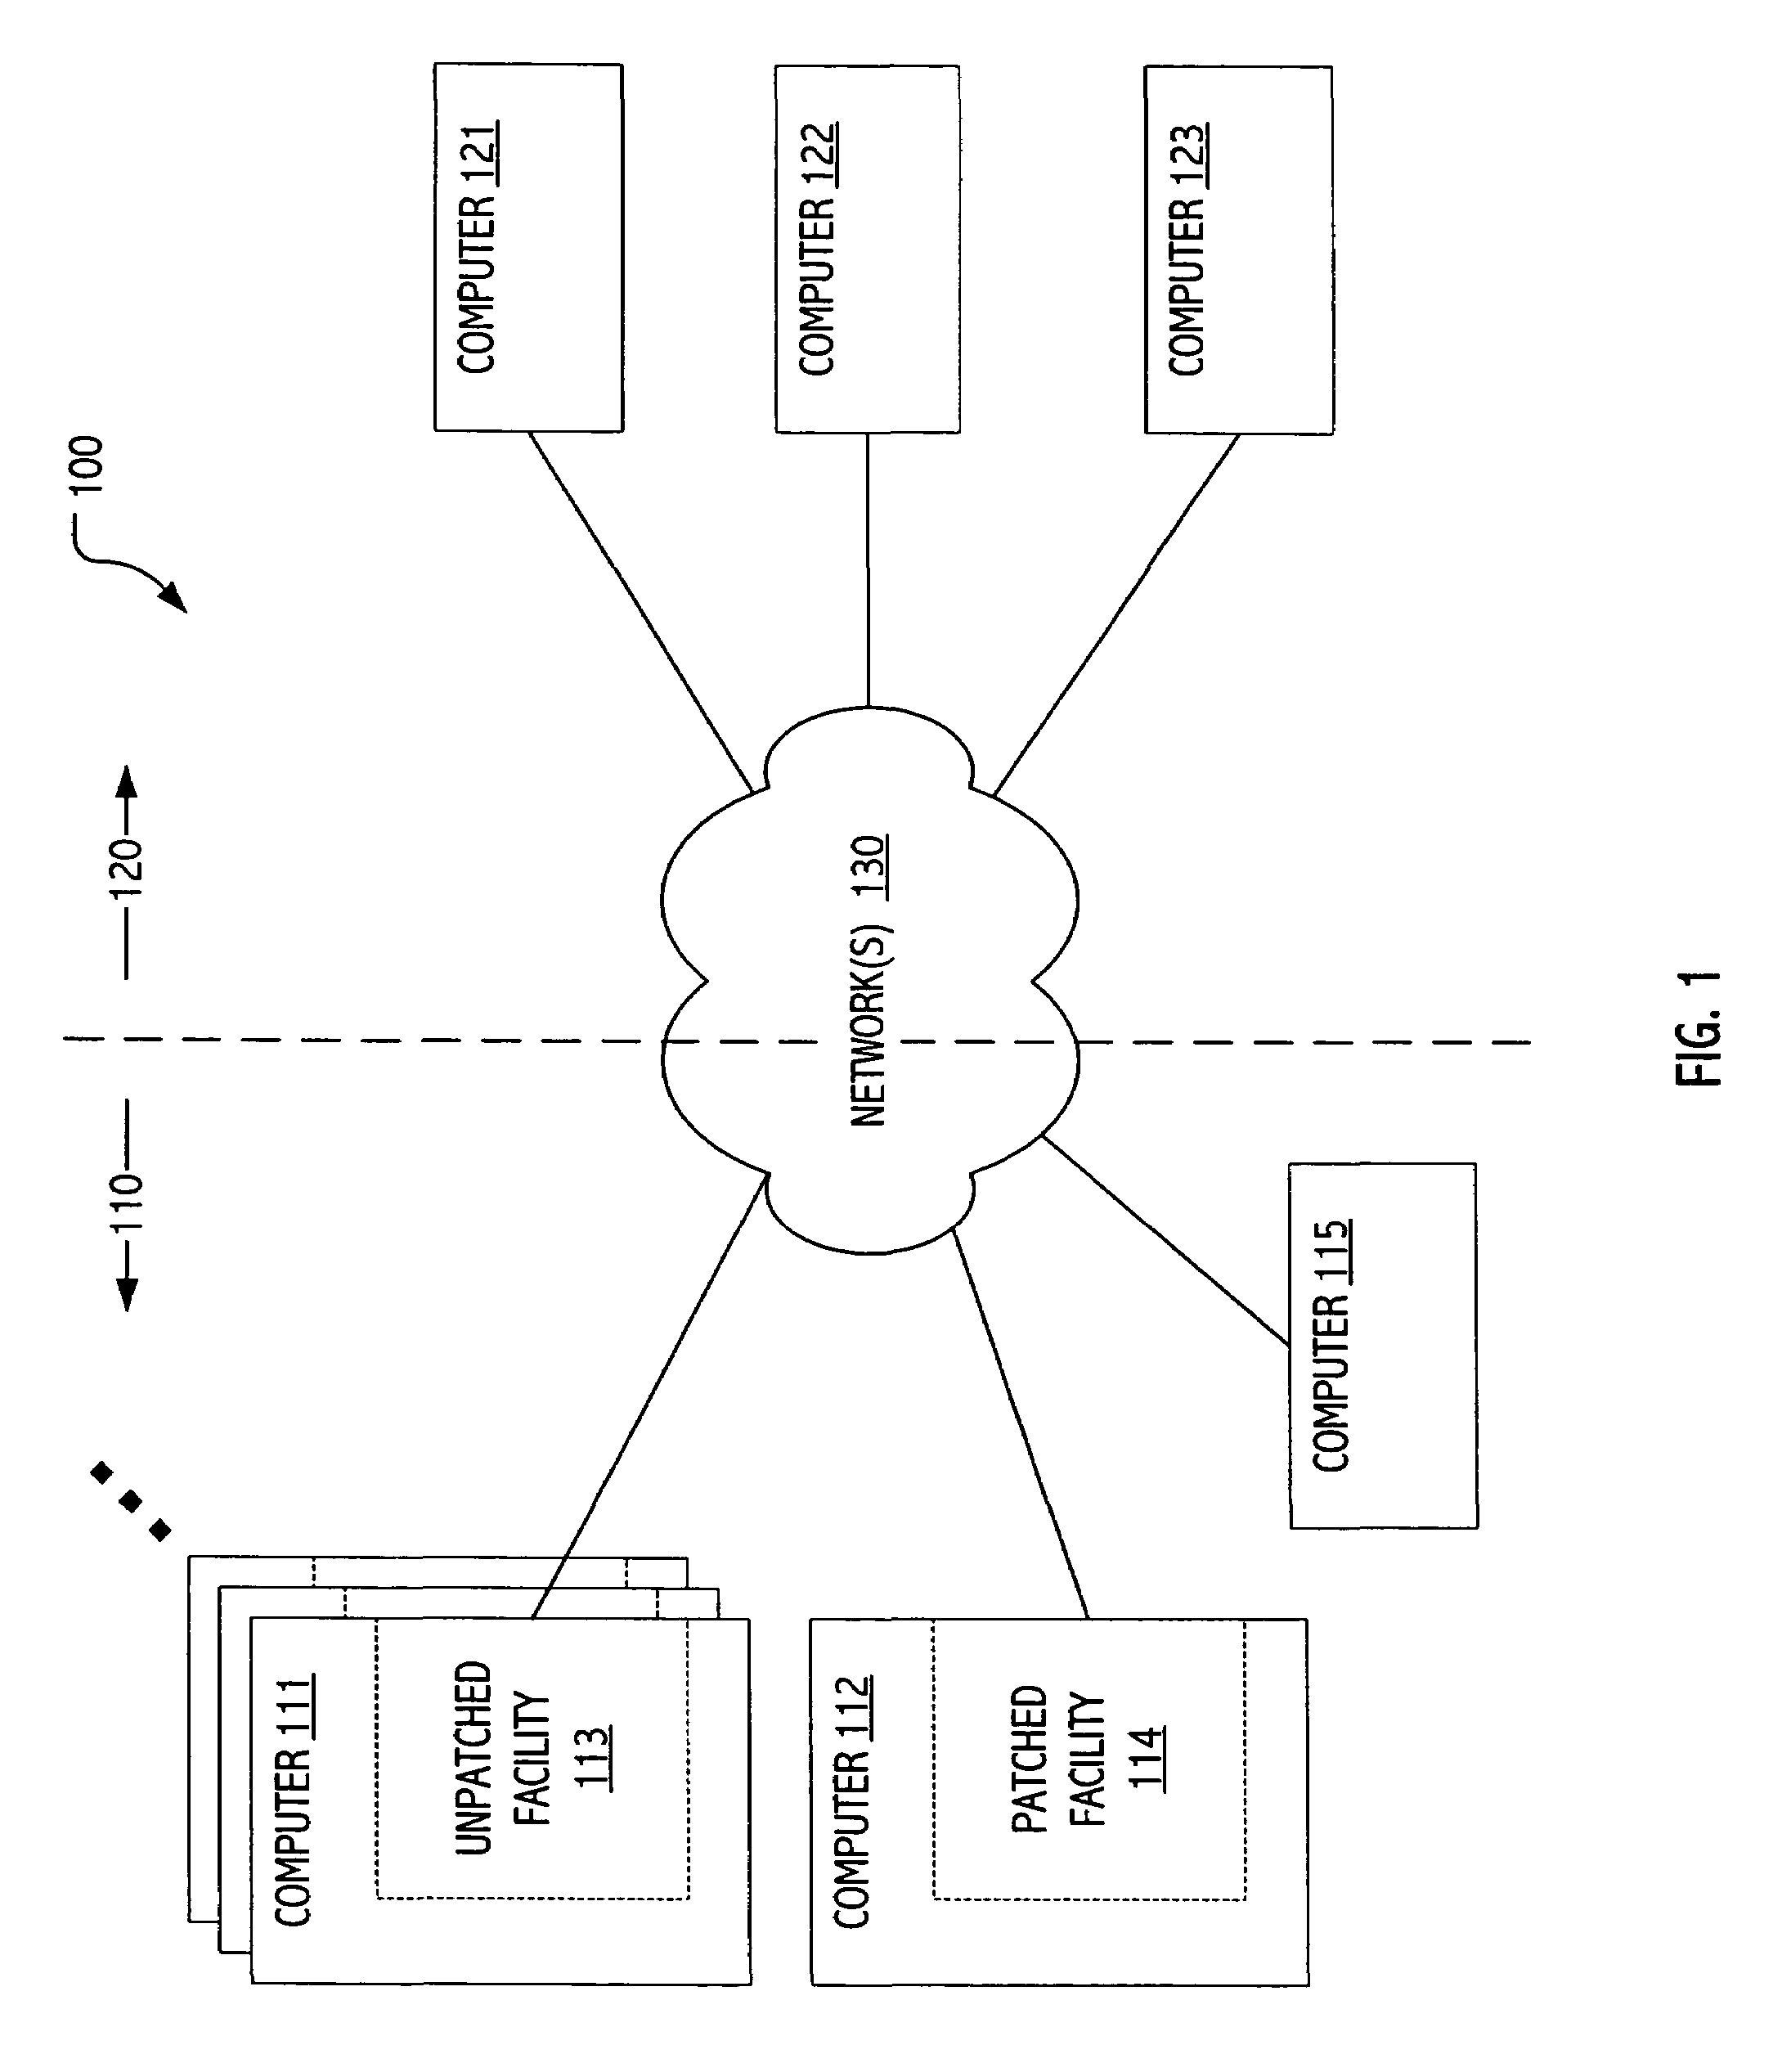 Computer security technique employing patch with detection and/or characterization mechanism for exploit of patched vulnerability